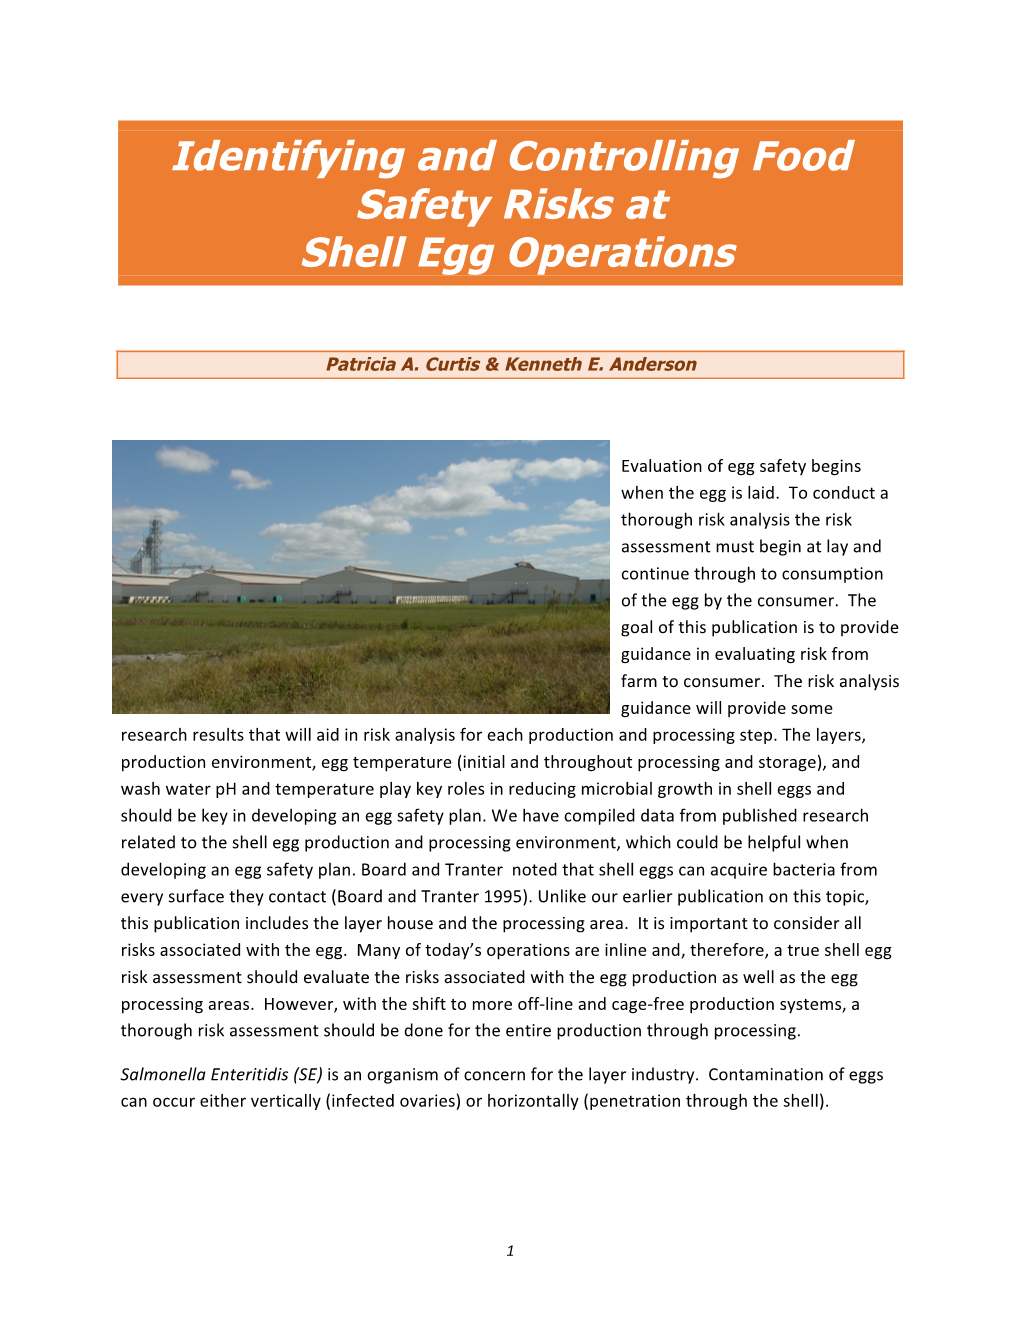 Identifying and Controlling Food Safety Risks at Shell Egg Operations